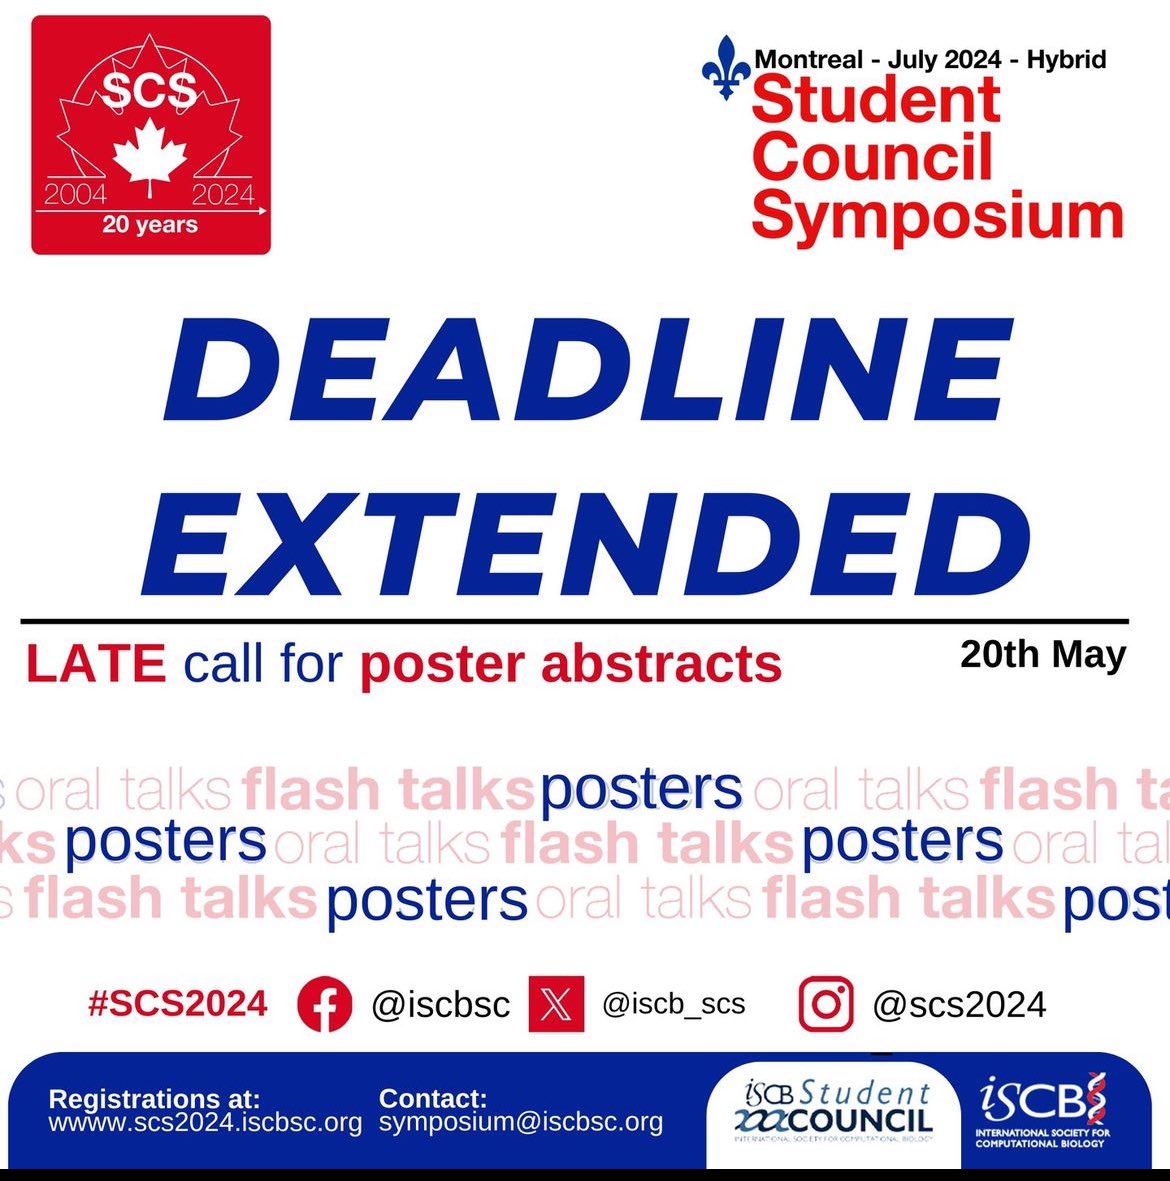 DEADLINE EXTENDED! Until May 20th

Good news! The deadline for POSTER abstract submissions for the ISCB #SCS2024 has been extended! However, please note that NO additional TALK abstracts will be considered.
Submit your poster abstract here: iscb.org/ismb2024/submi…